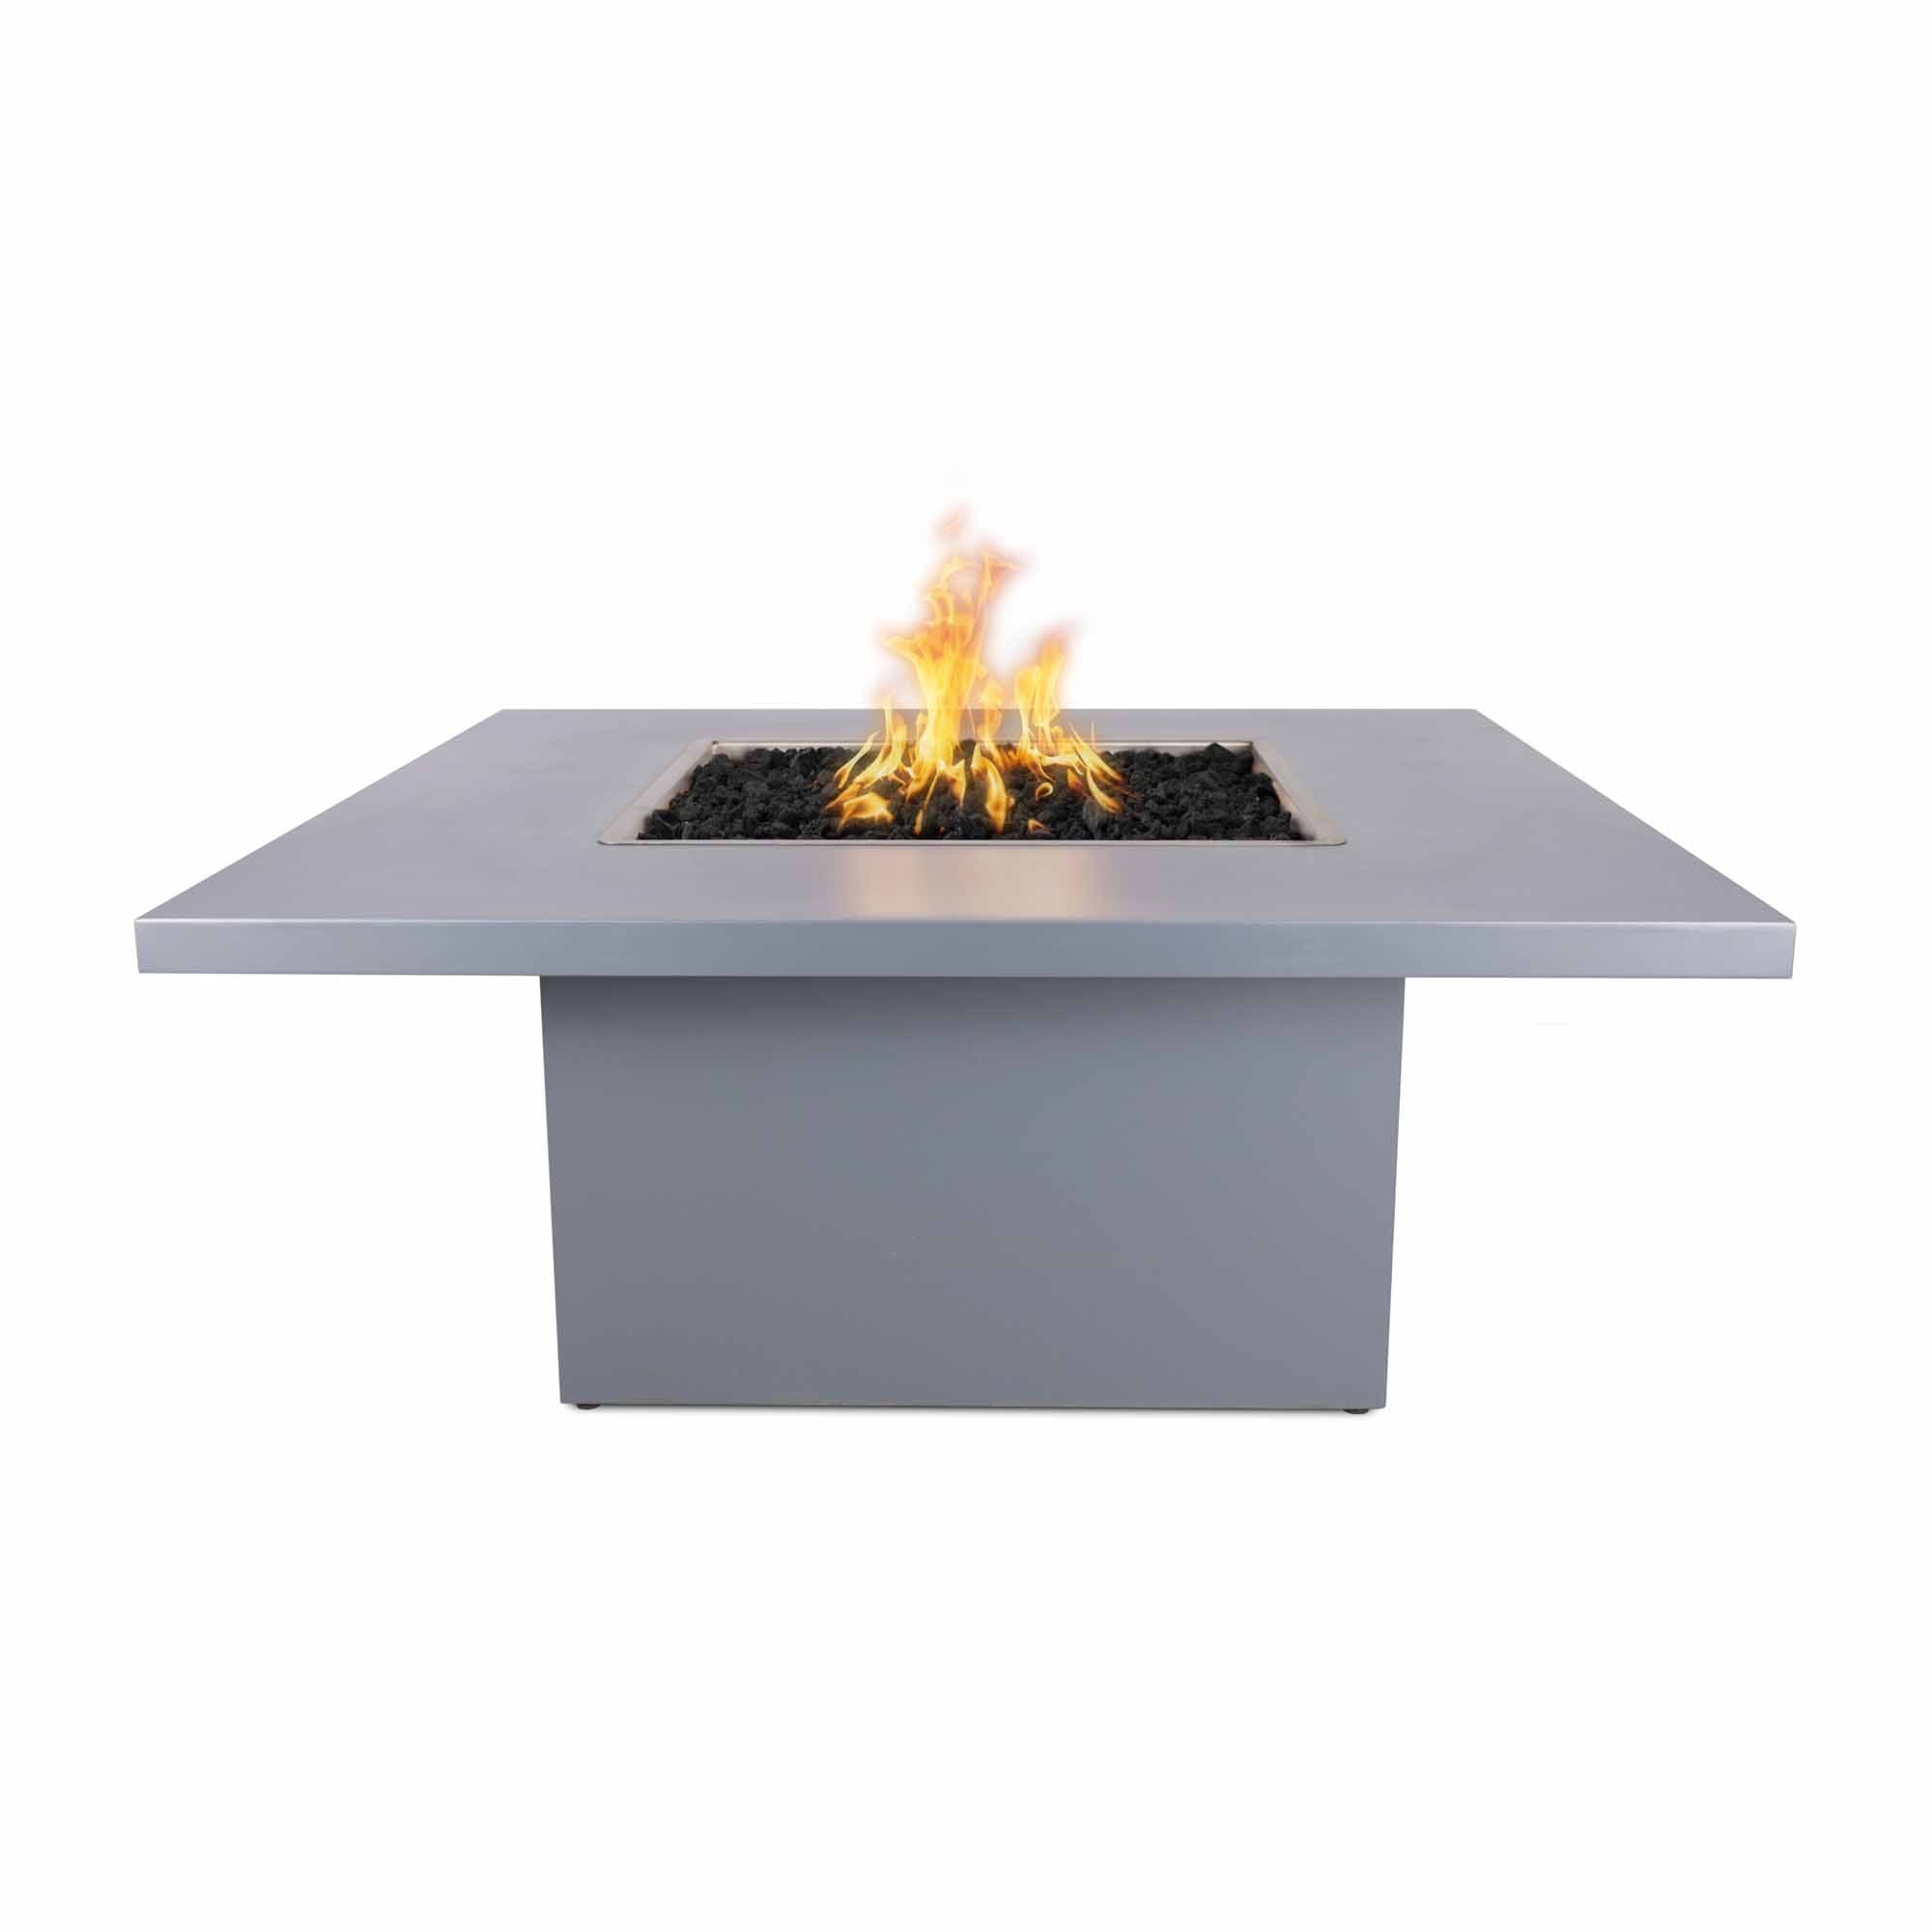 The Outdoor Plus Bella Stainless Steel Fire Table